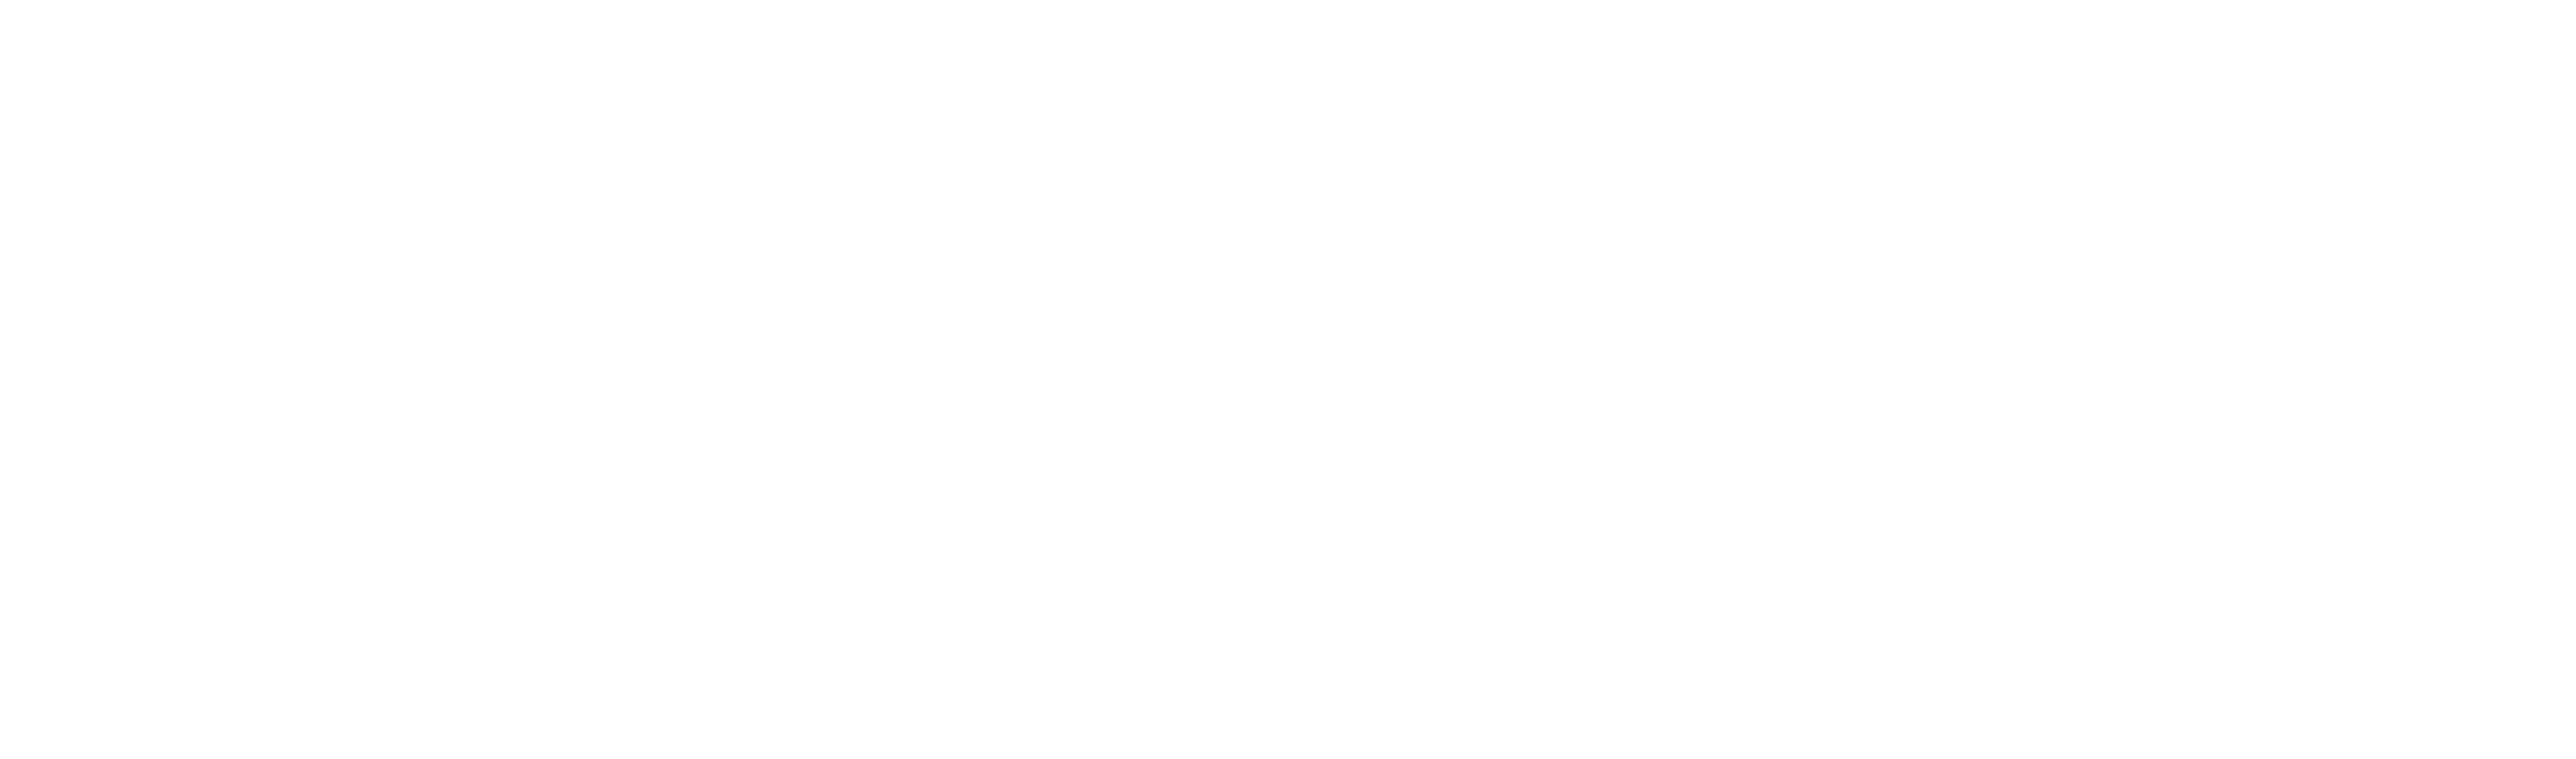 Small Business Development Corporation: Home Page